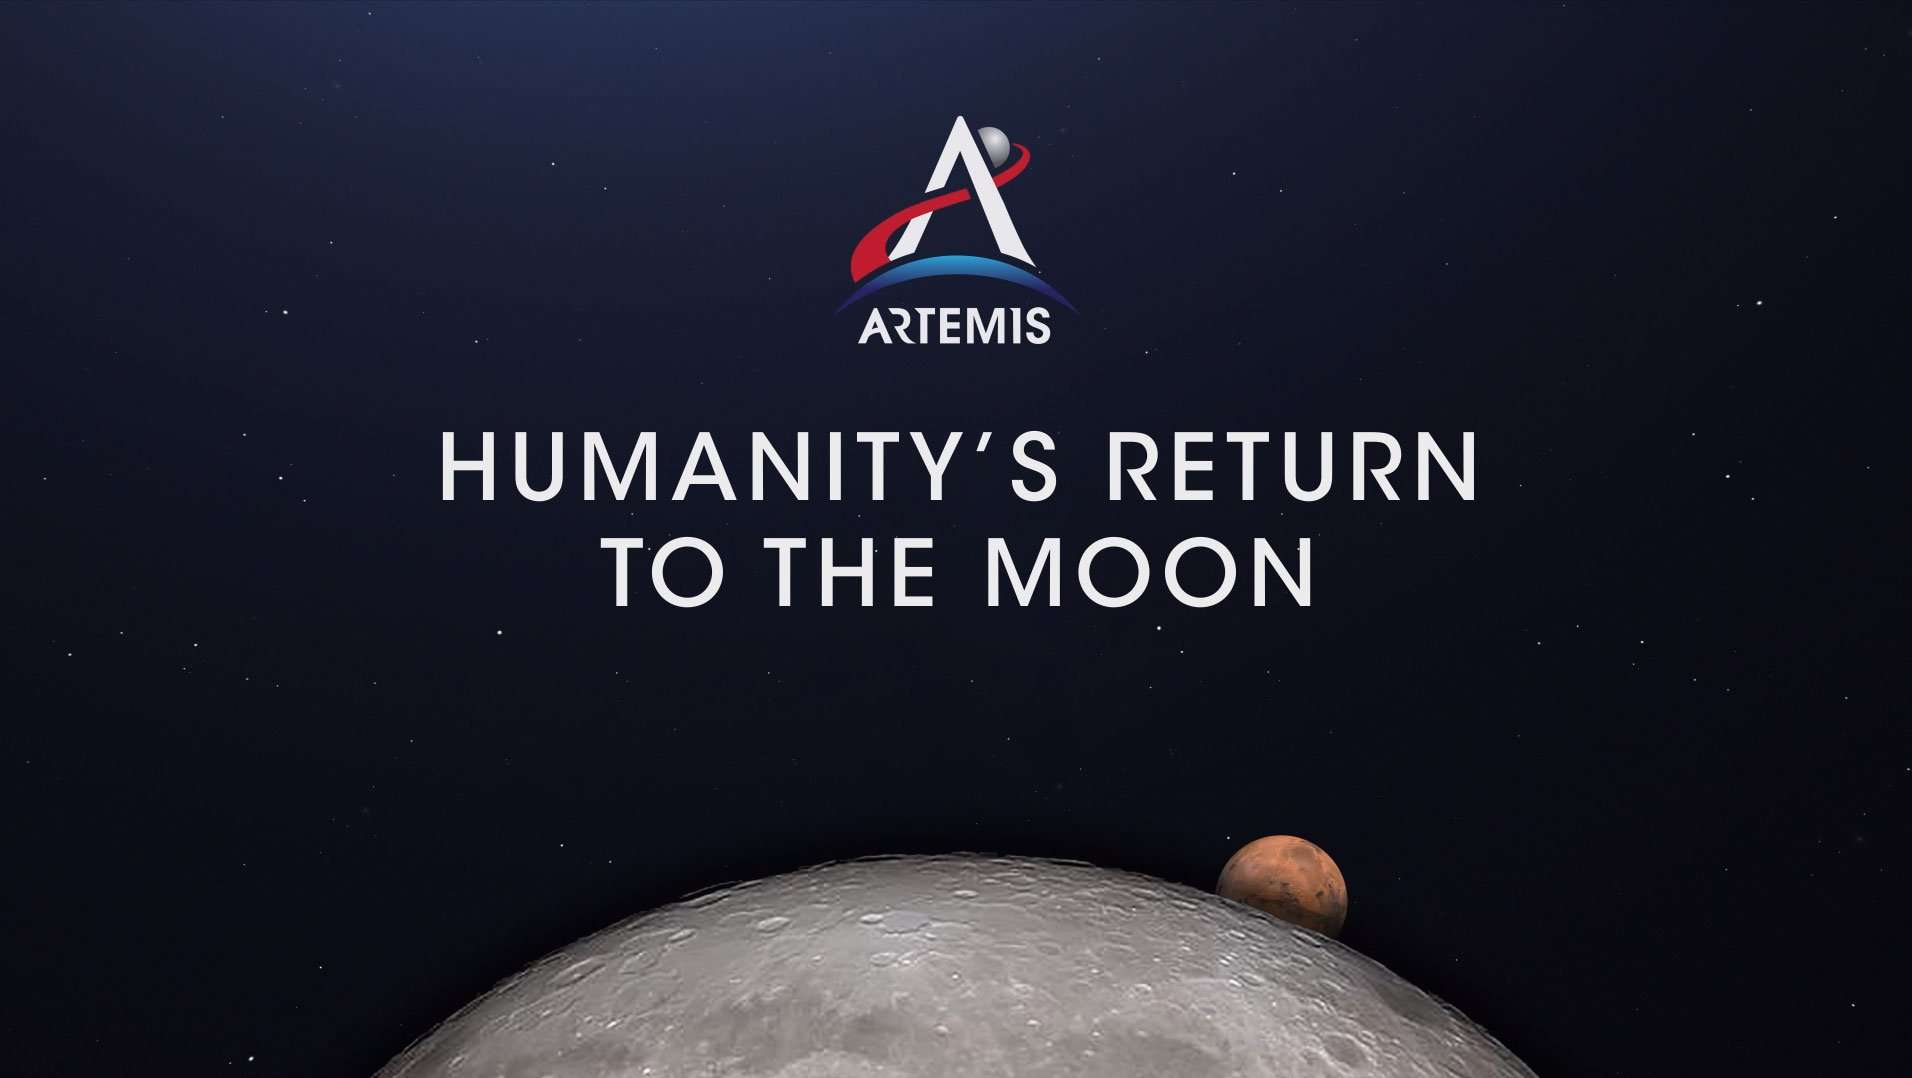 image for NASA announces the Artemis program to put the first female astronaut on the Moon by 2024!